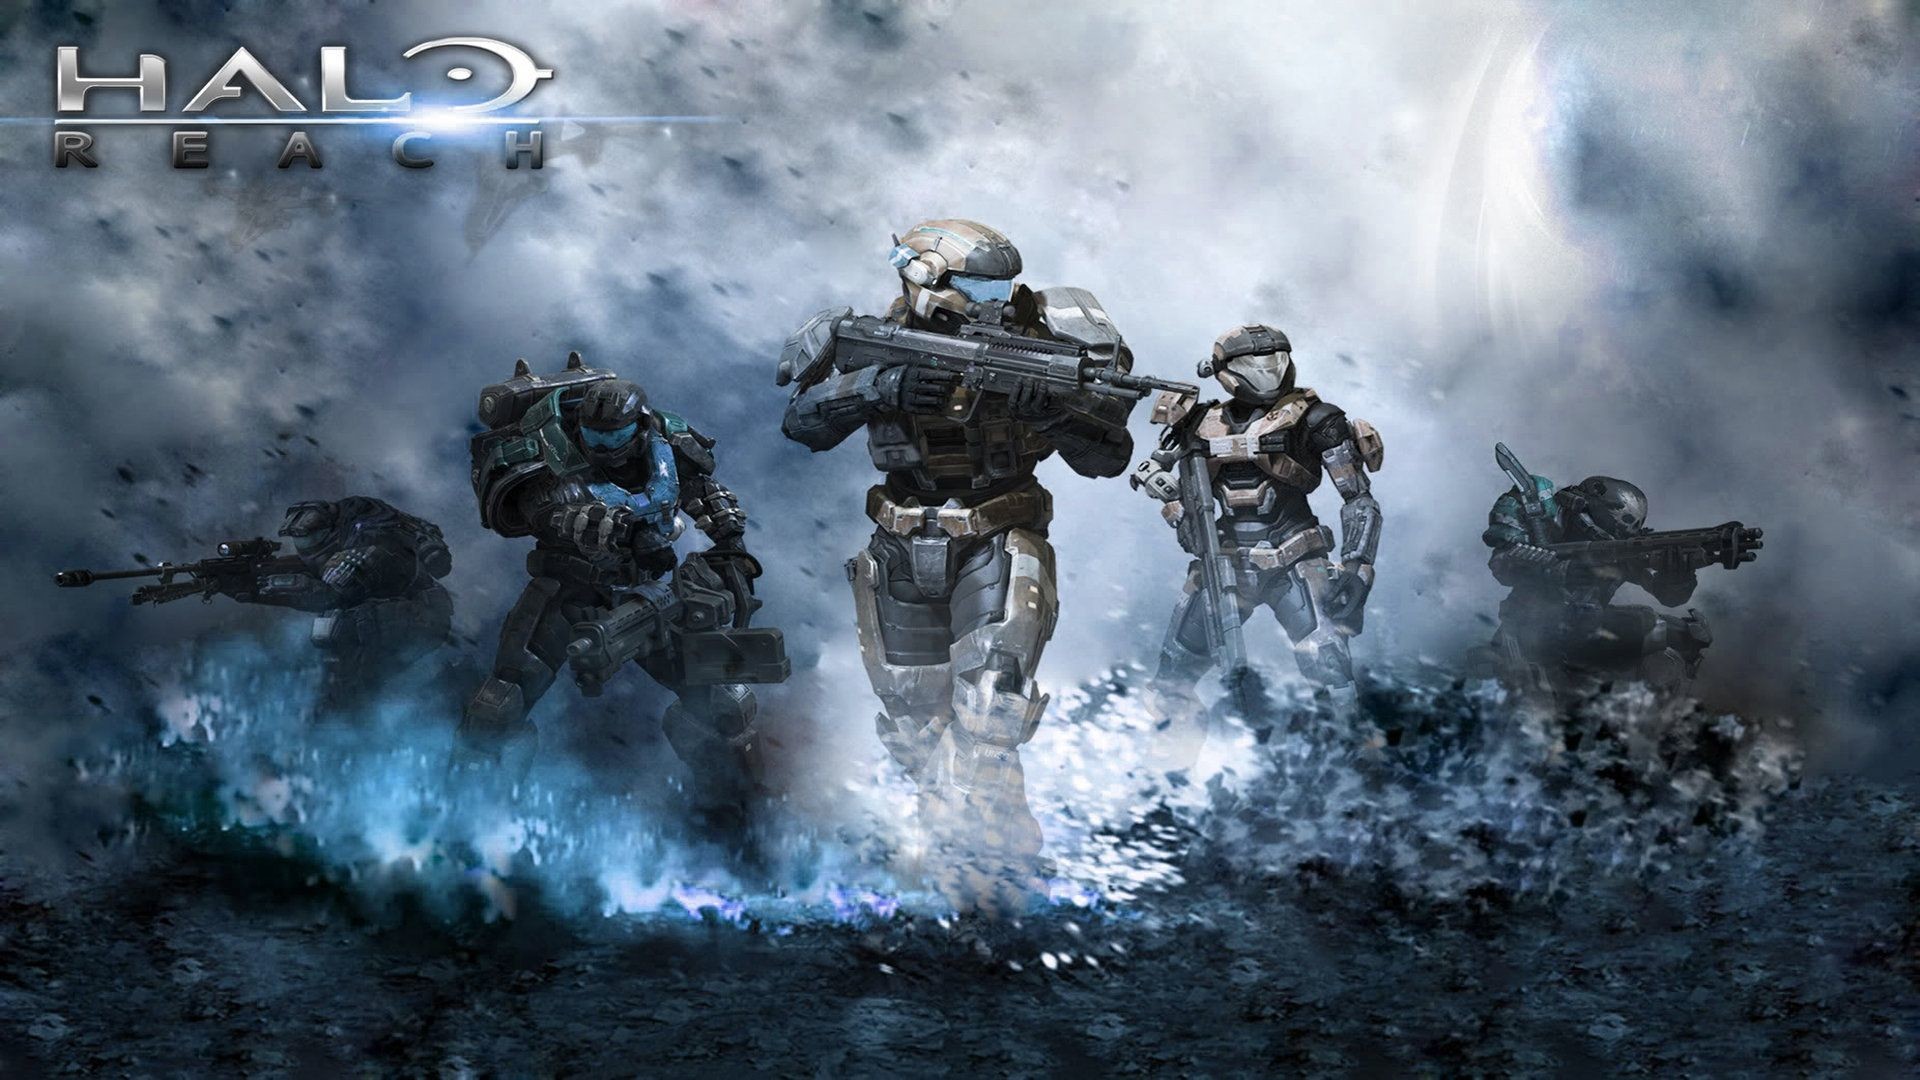 Halo HD Wallpapers Backgrounds Wallpaper 19201200 Halo Wallpaper Hd 37 Wallpapers